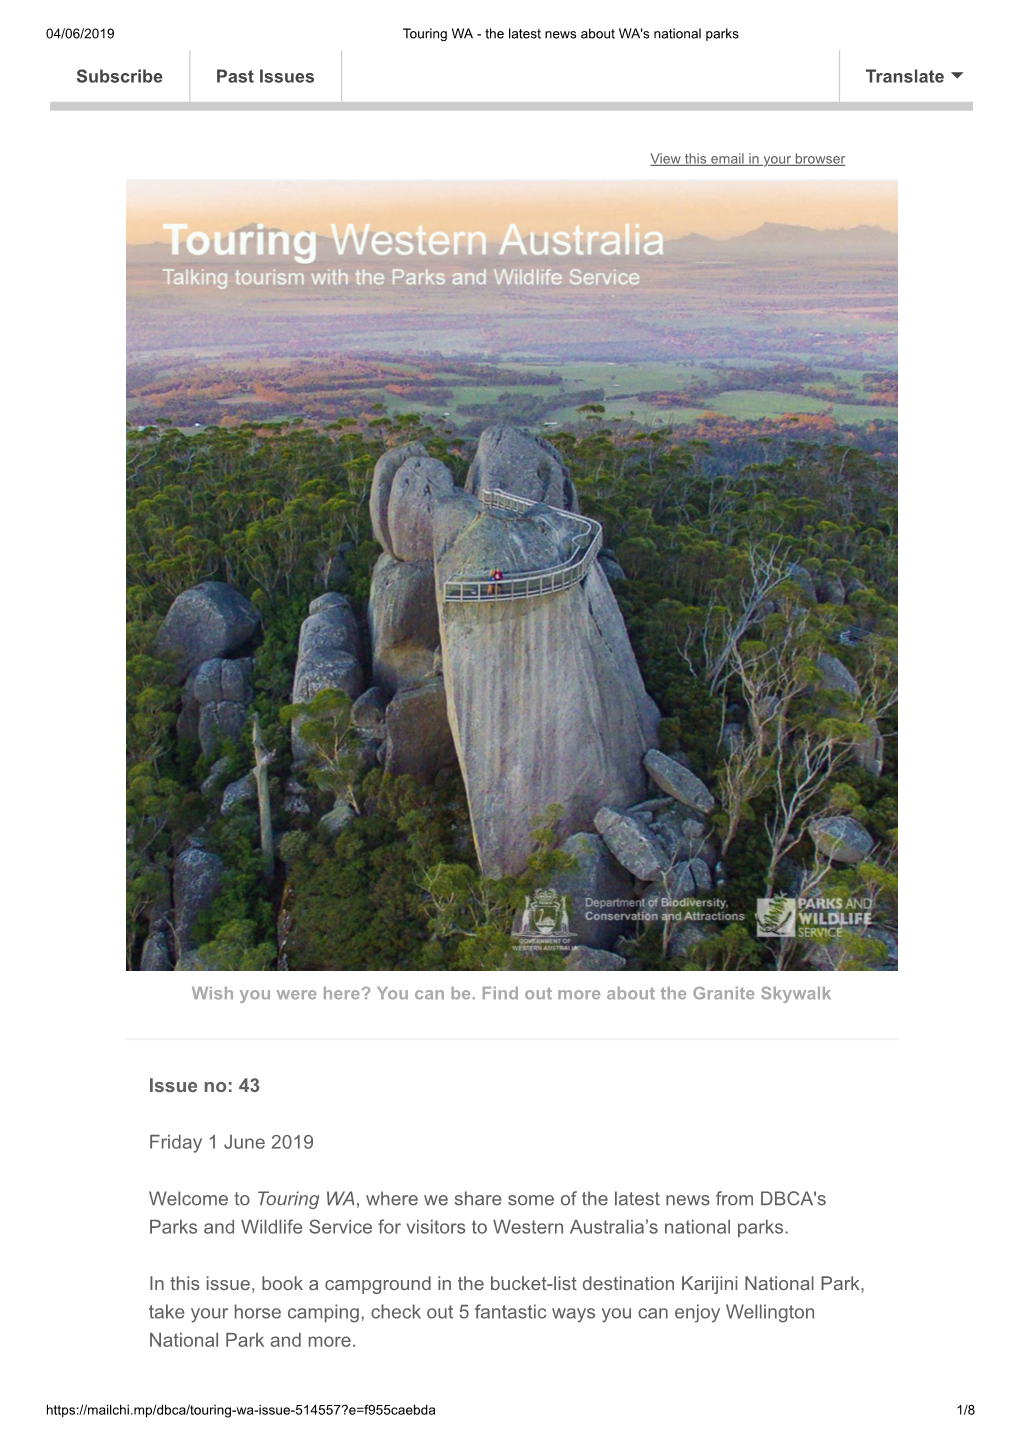 43 Friday 1 June 2019 Welcome to Touring WA, Where We Share Some